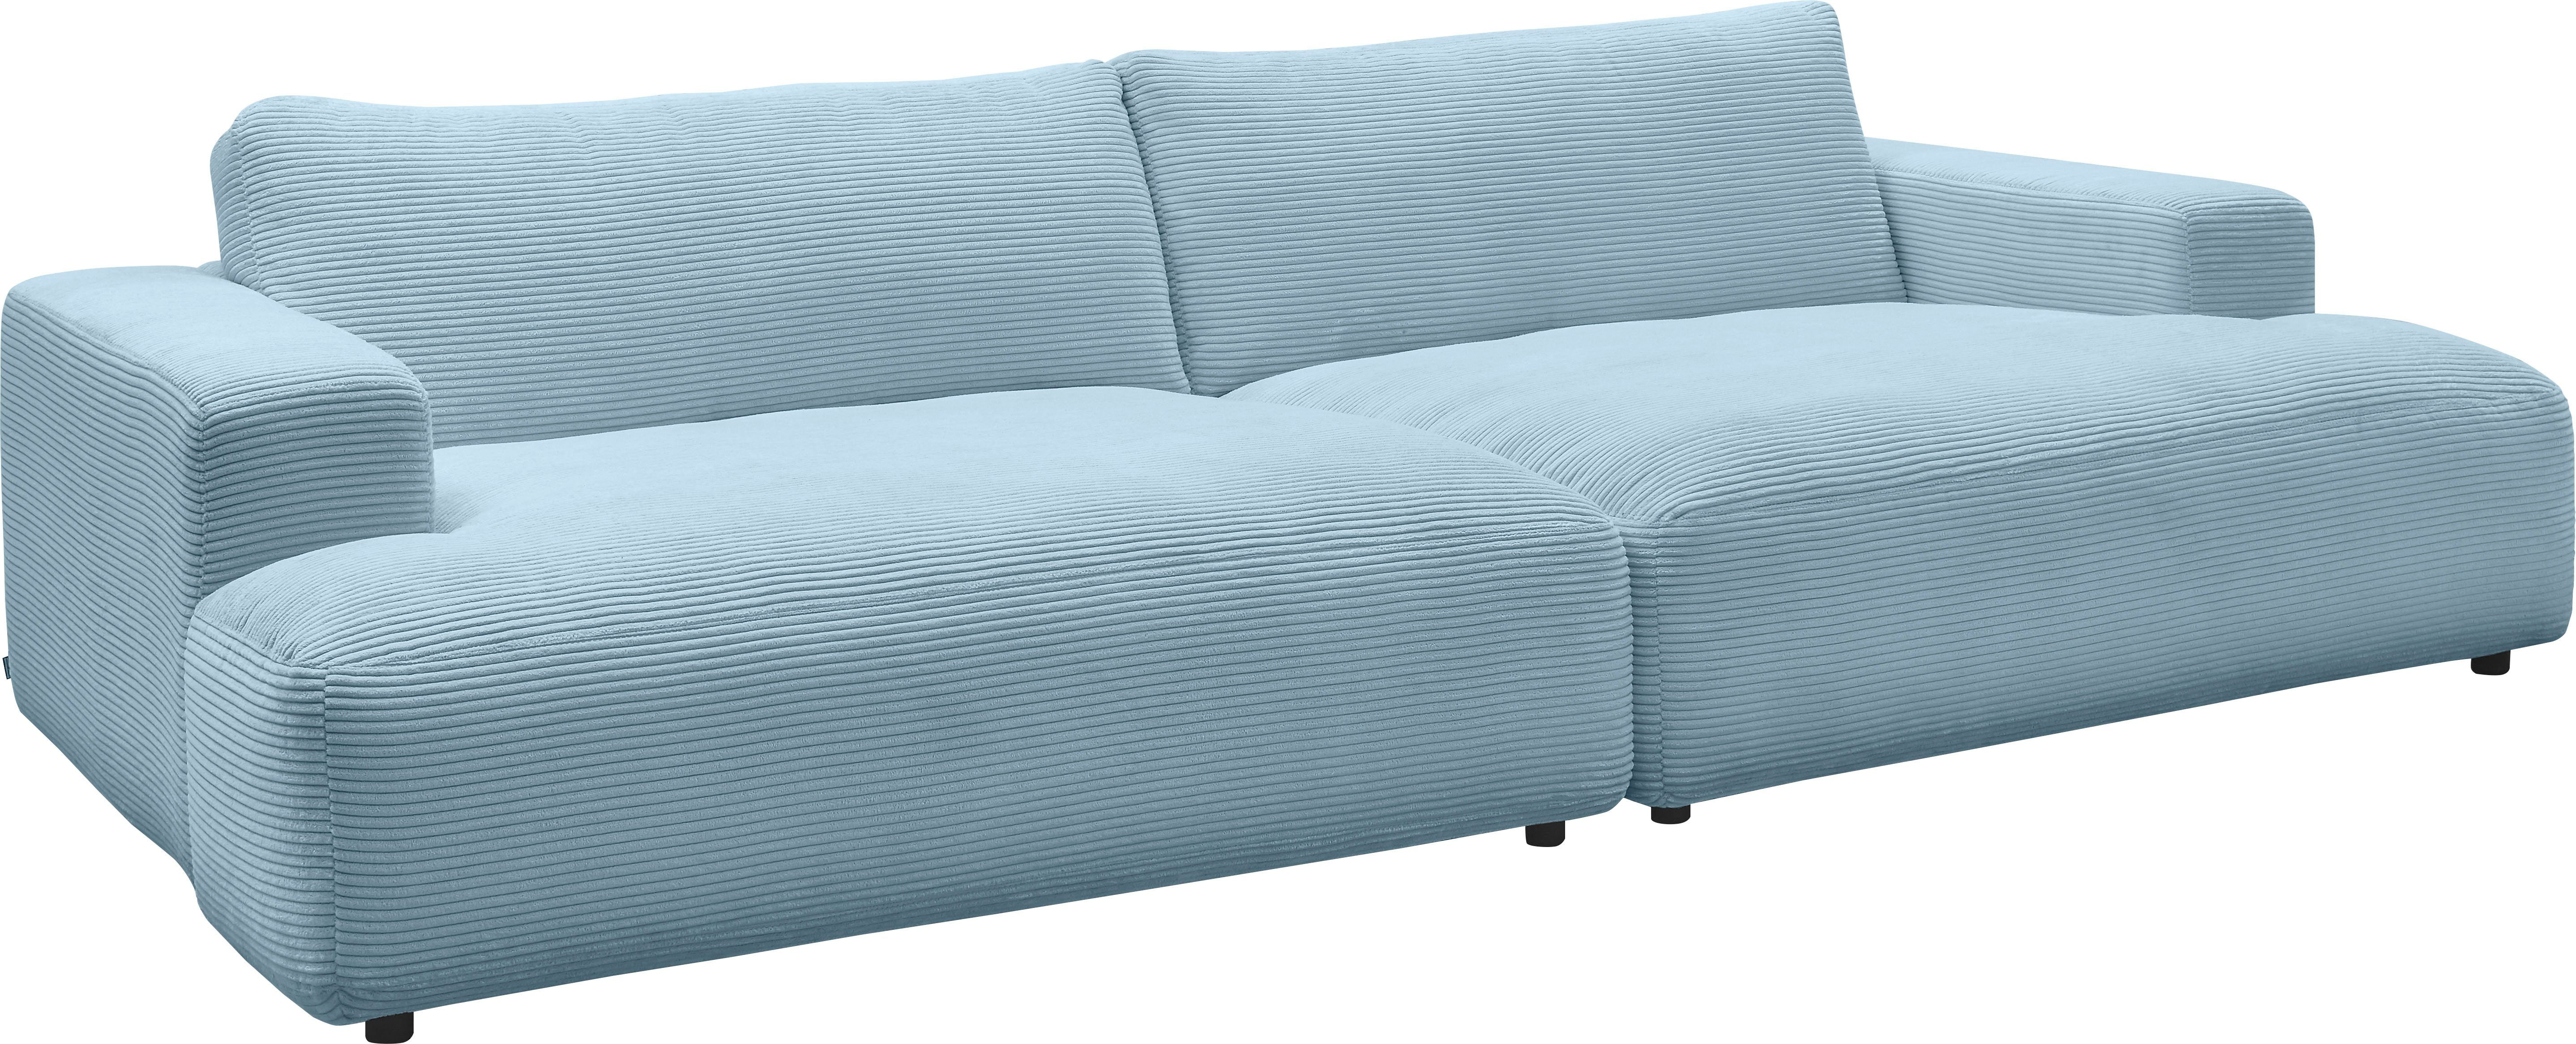 GALLERY M branded by Musterring cm Cord-Bezug, Loungesofa 292 light-blue Lucia, Breite